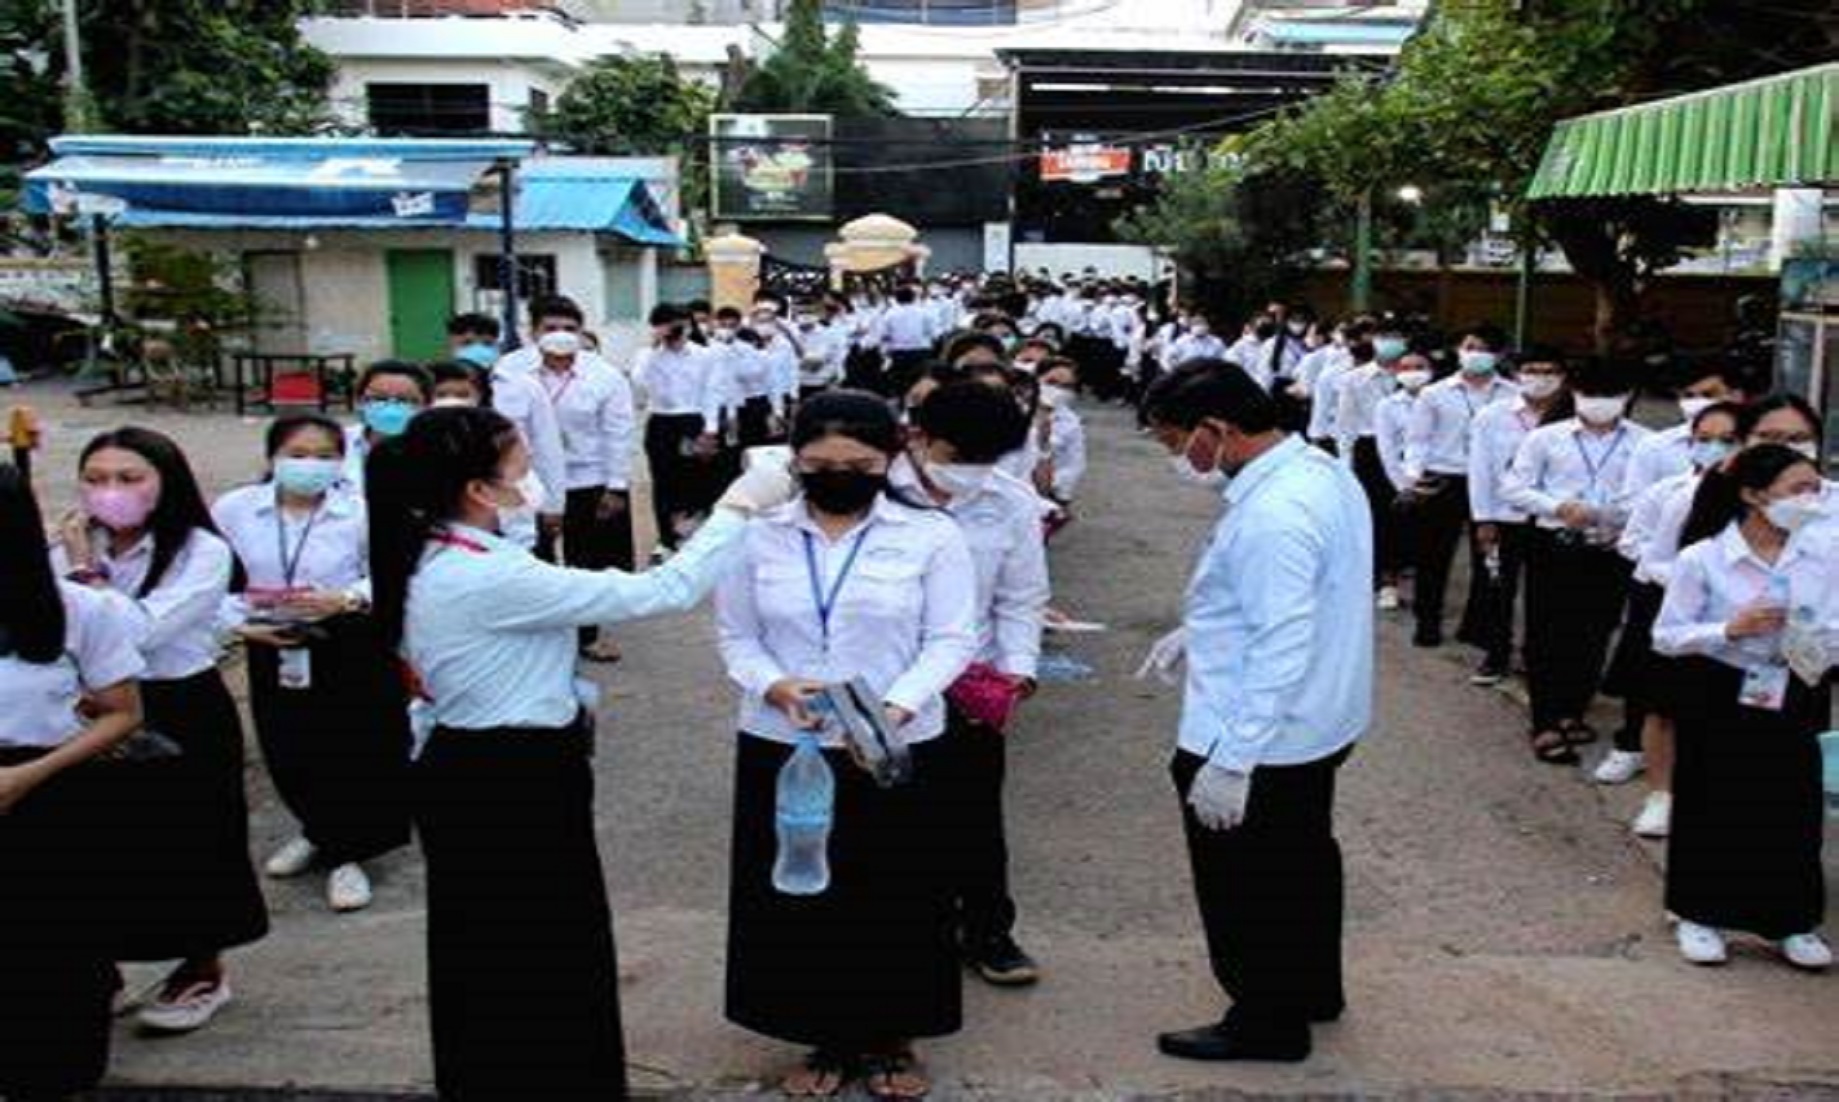 High School Exam Kicks Off In Cambodia After Pandemic Under Control